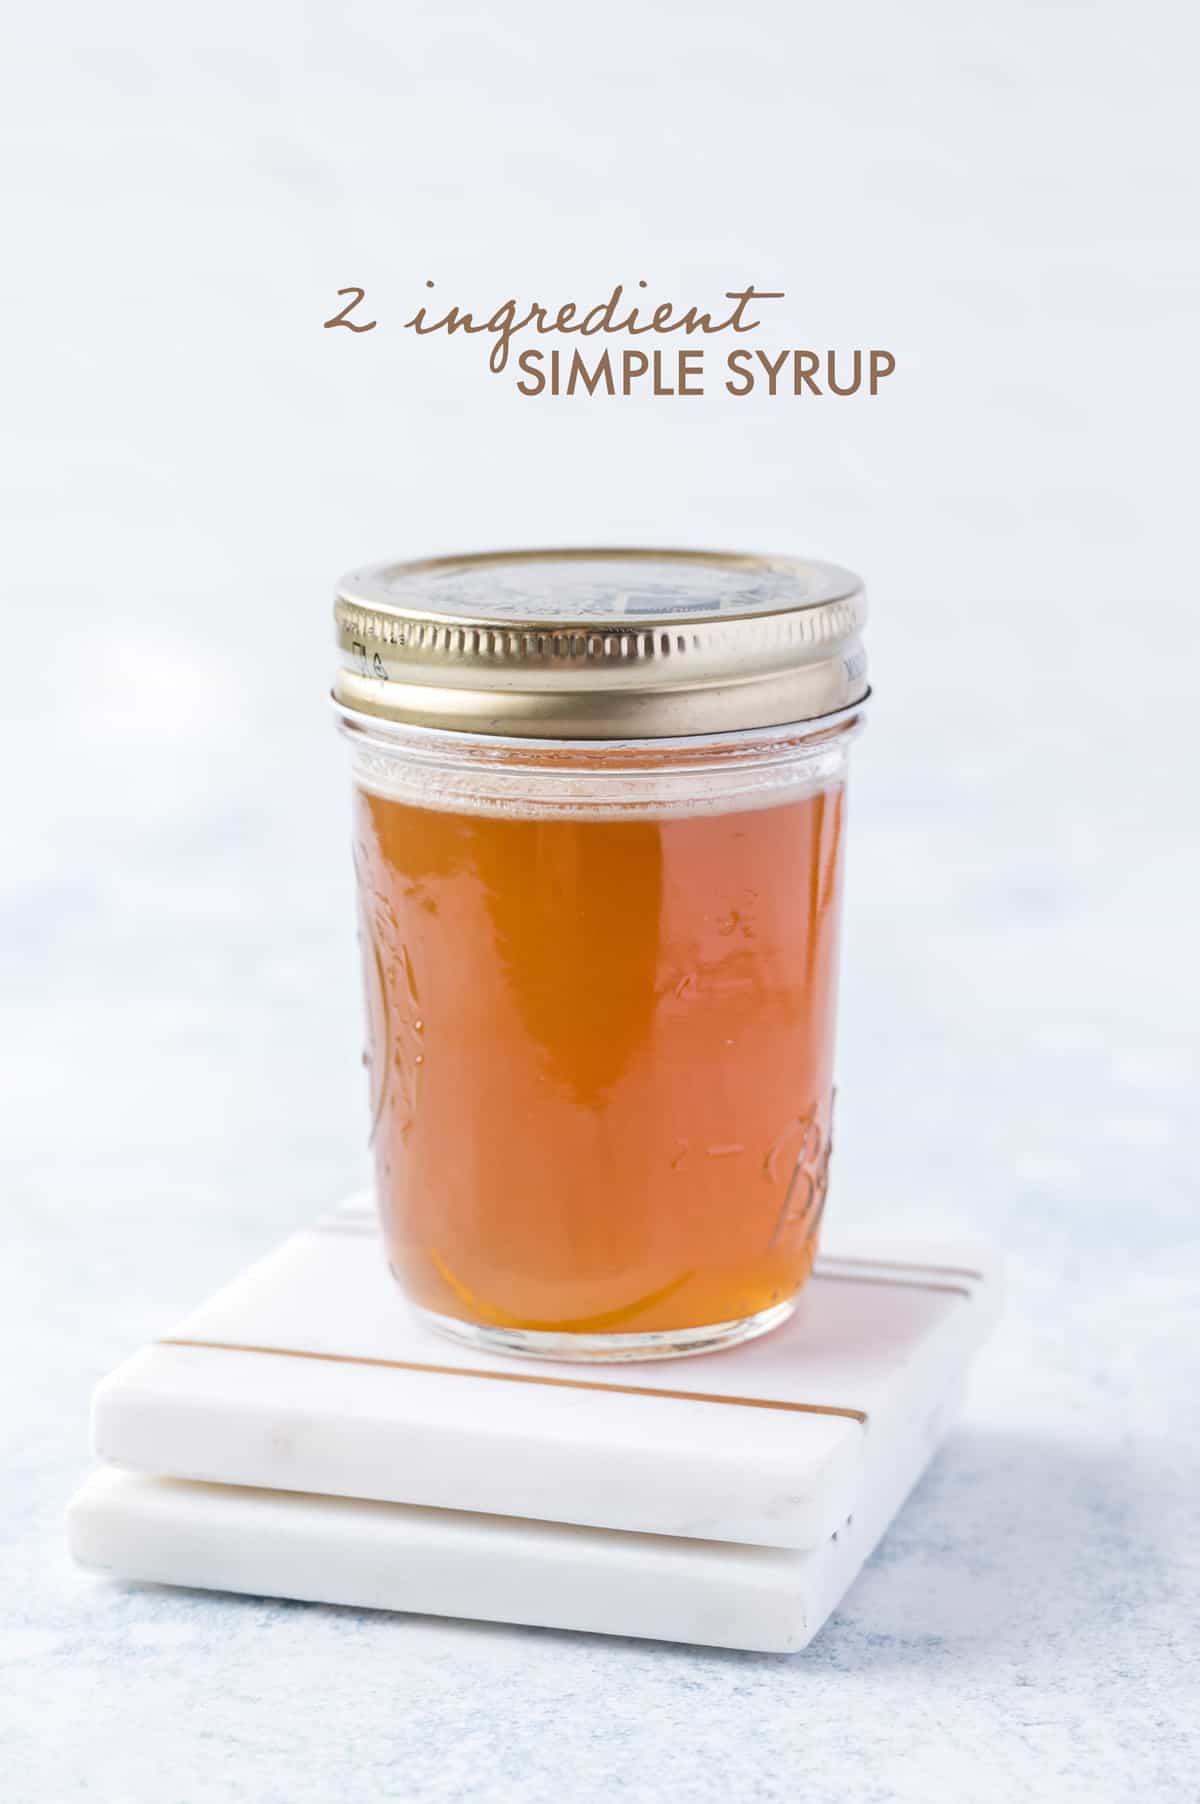 East Simple Syrup Recipe